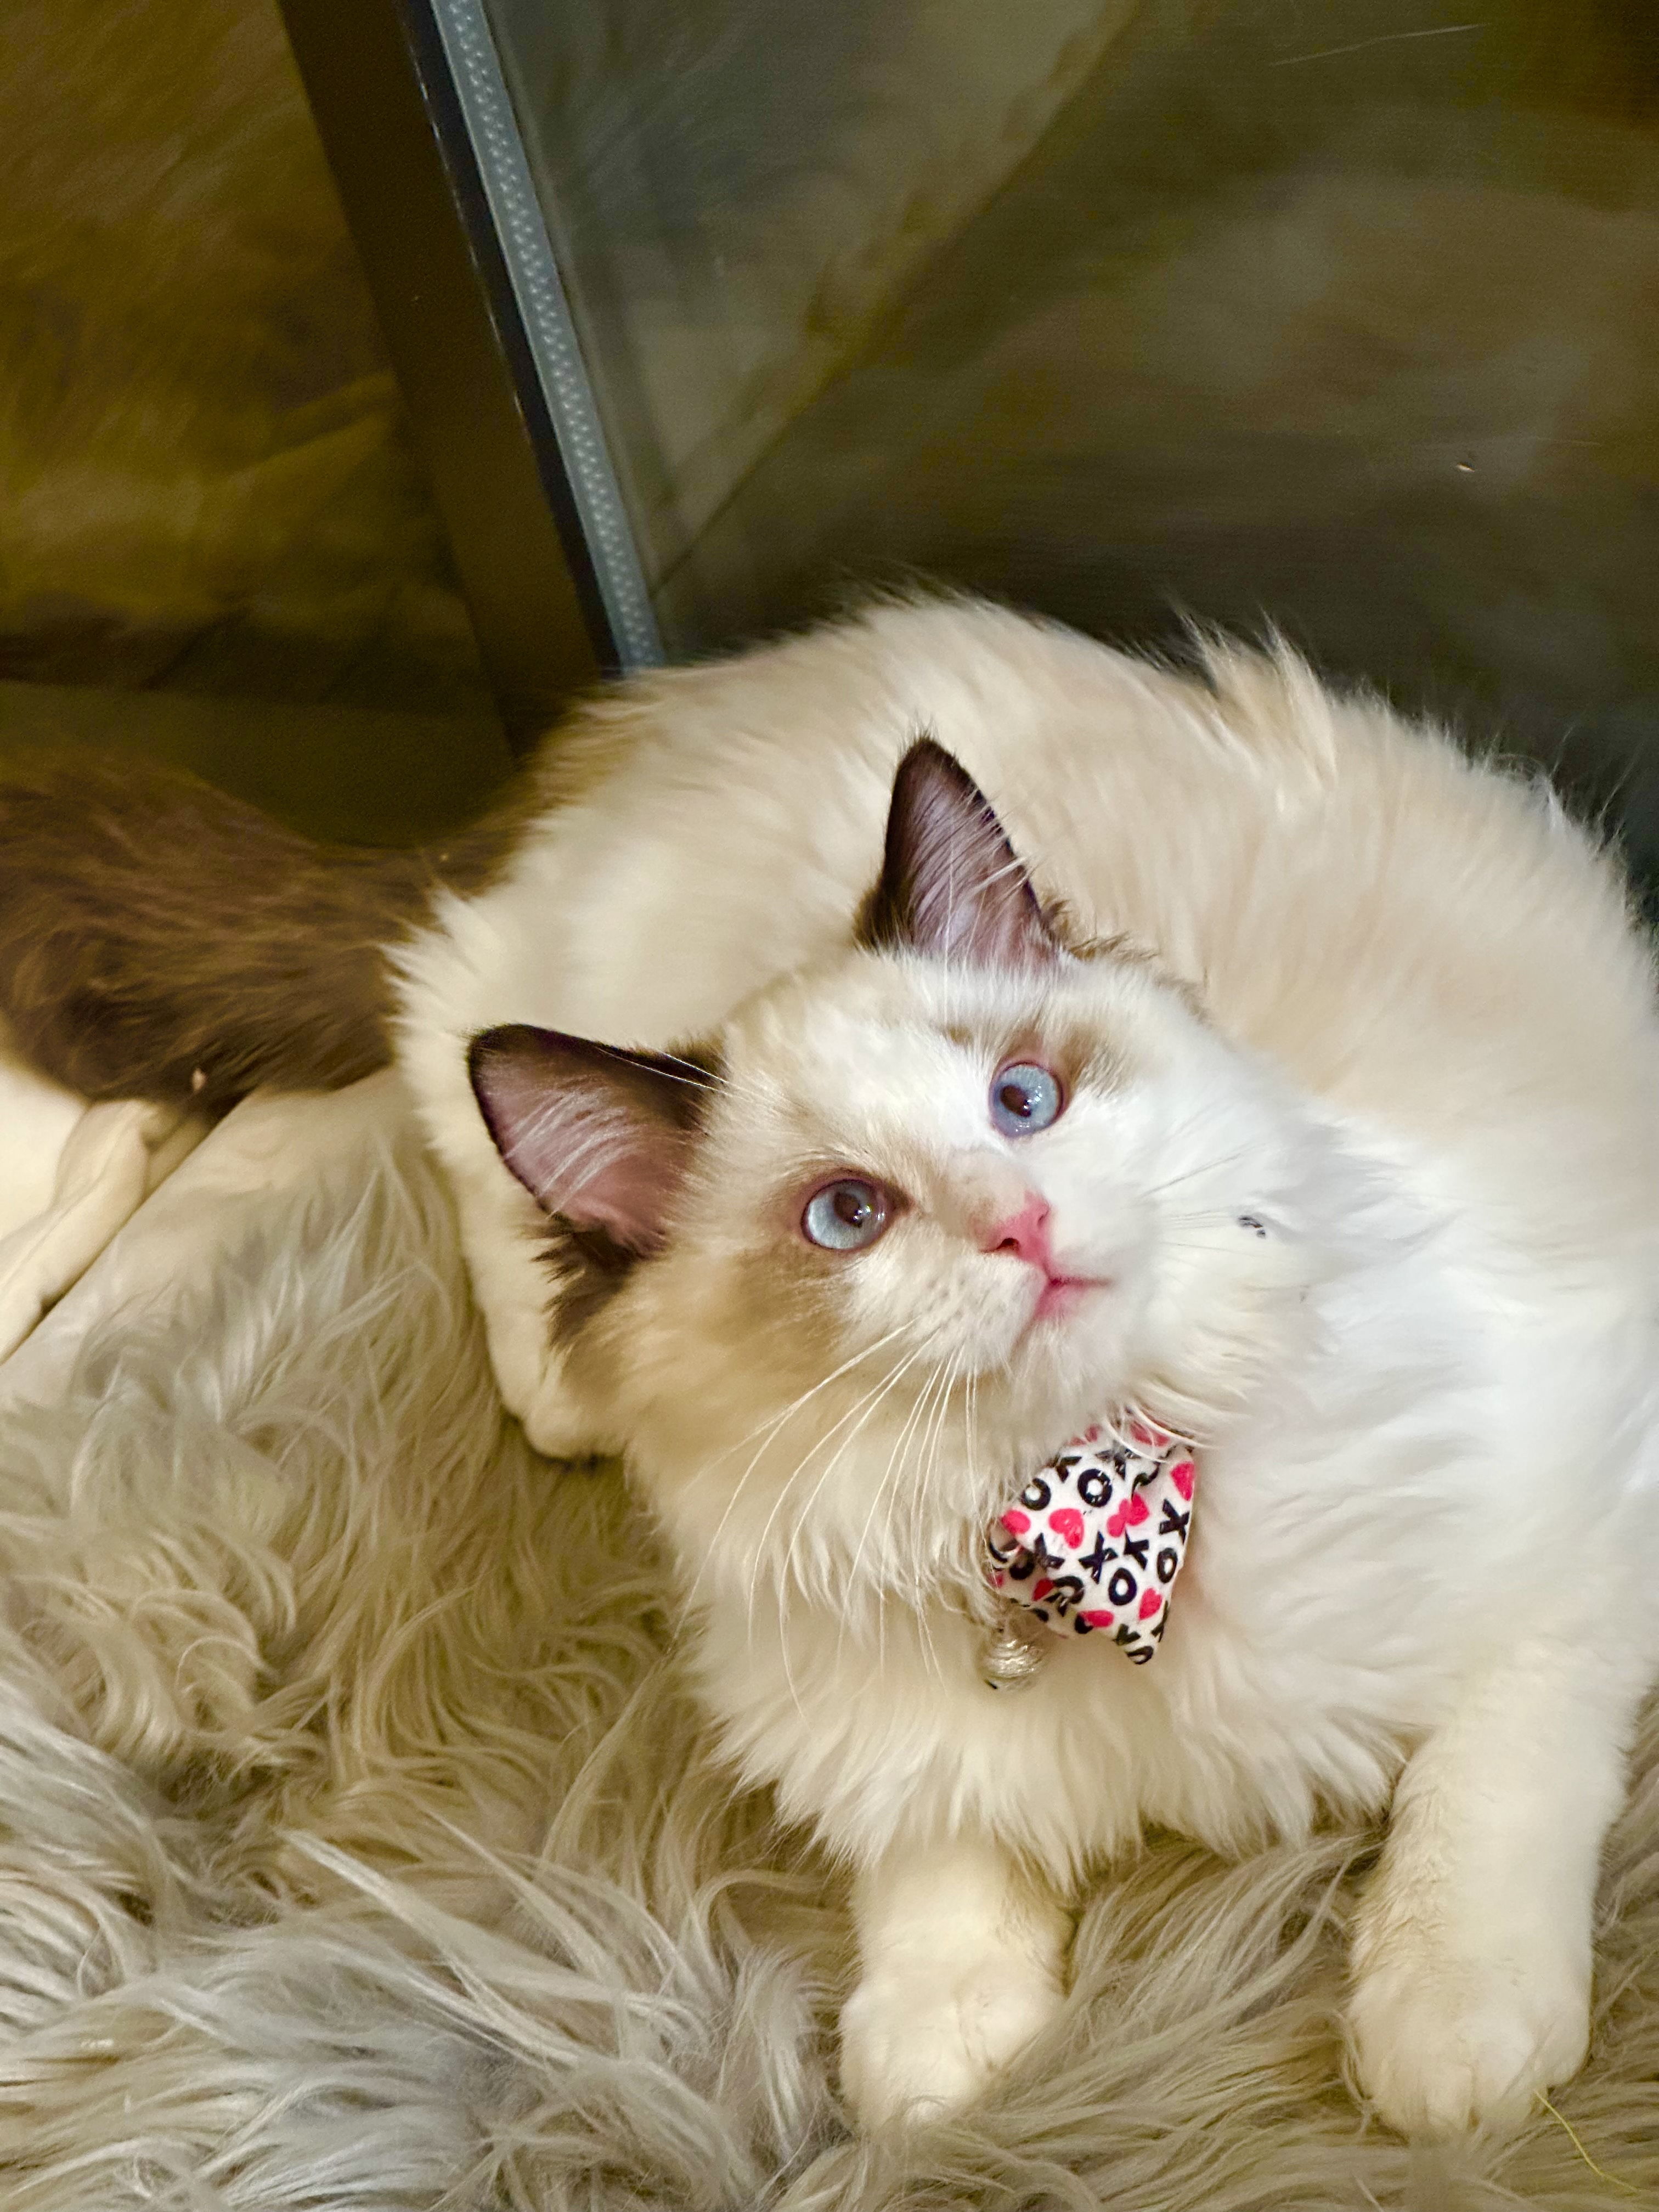 His dense fur and beautiful eyes will attract the attention of everyone around. He is tender and caring, always ready to be by your side and give his love.